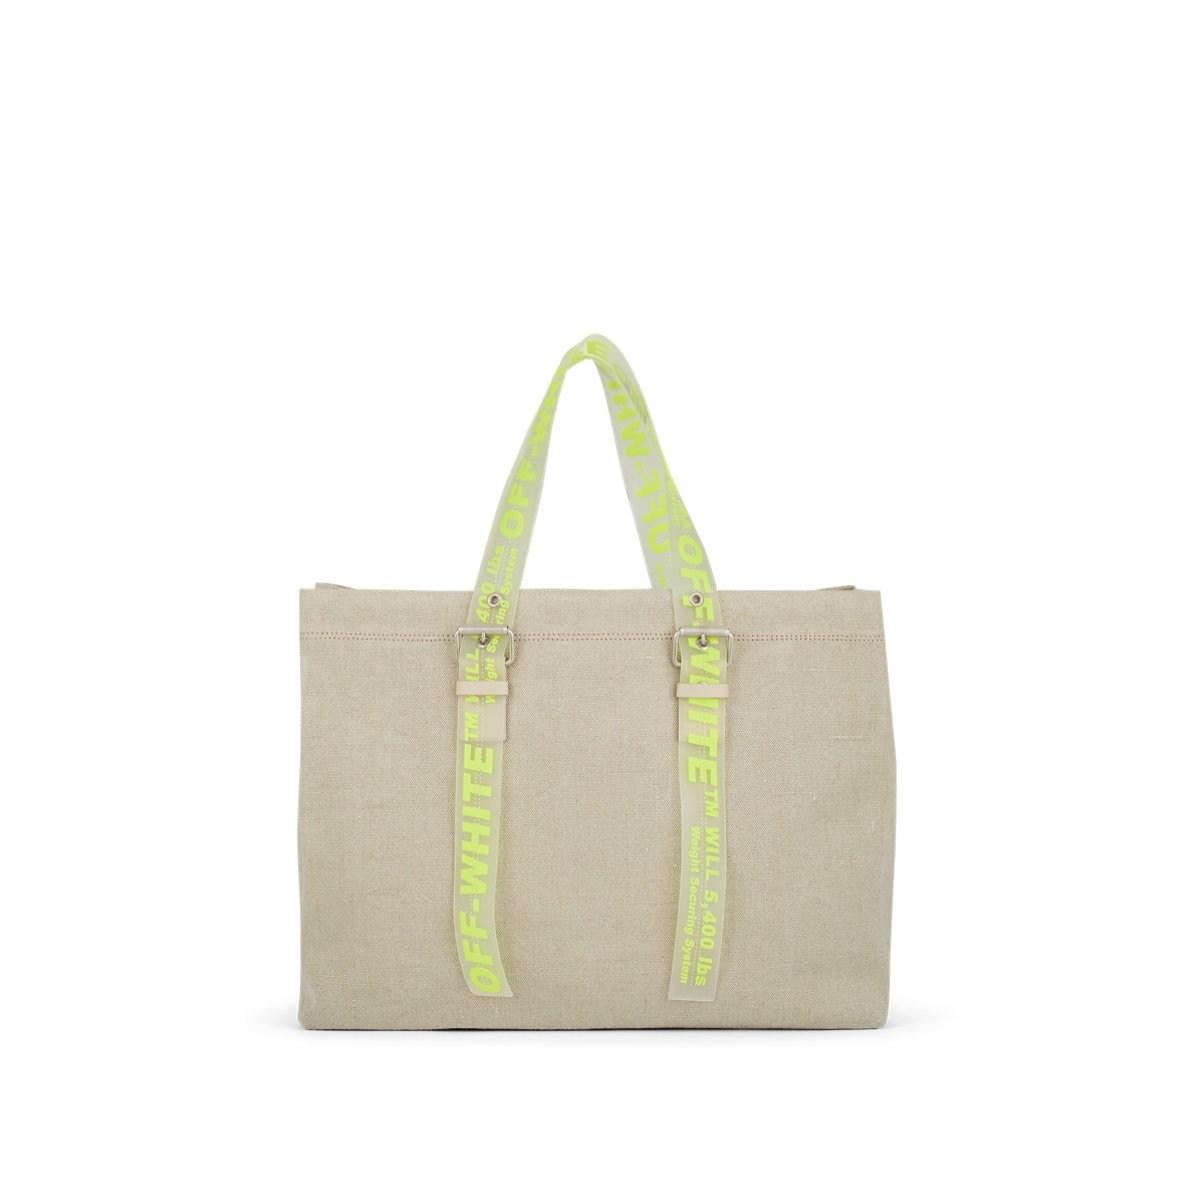 Off-White c/o Virgil Abloh Canvas Tote Bag in Natural - Lyst